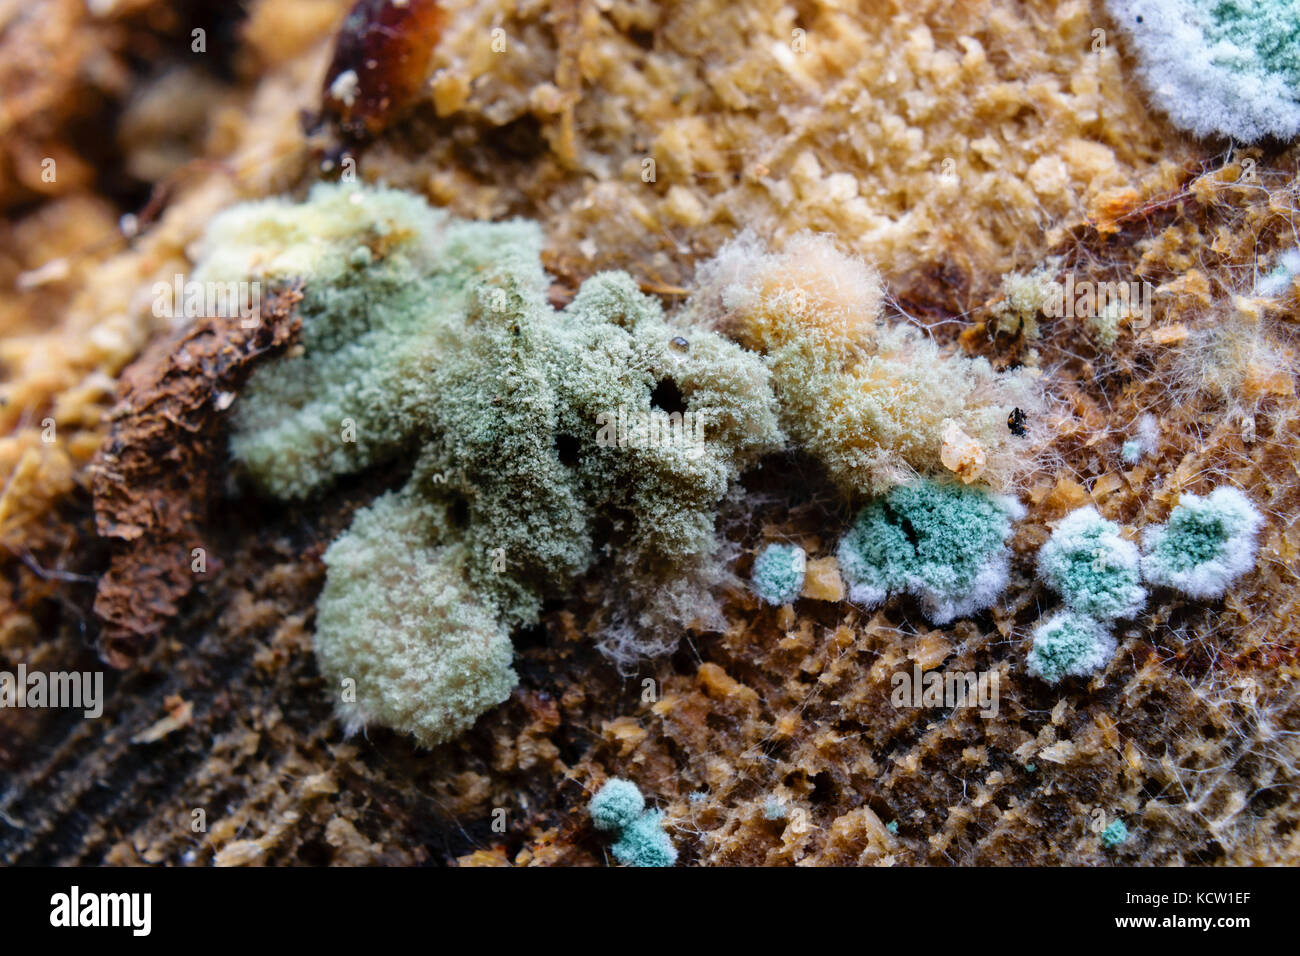 Extreme Close-Up Of Brown And Blue Mold Growing On Wood Stock Photo